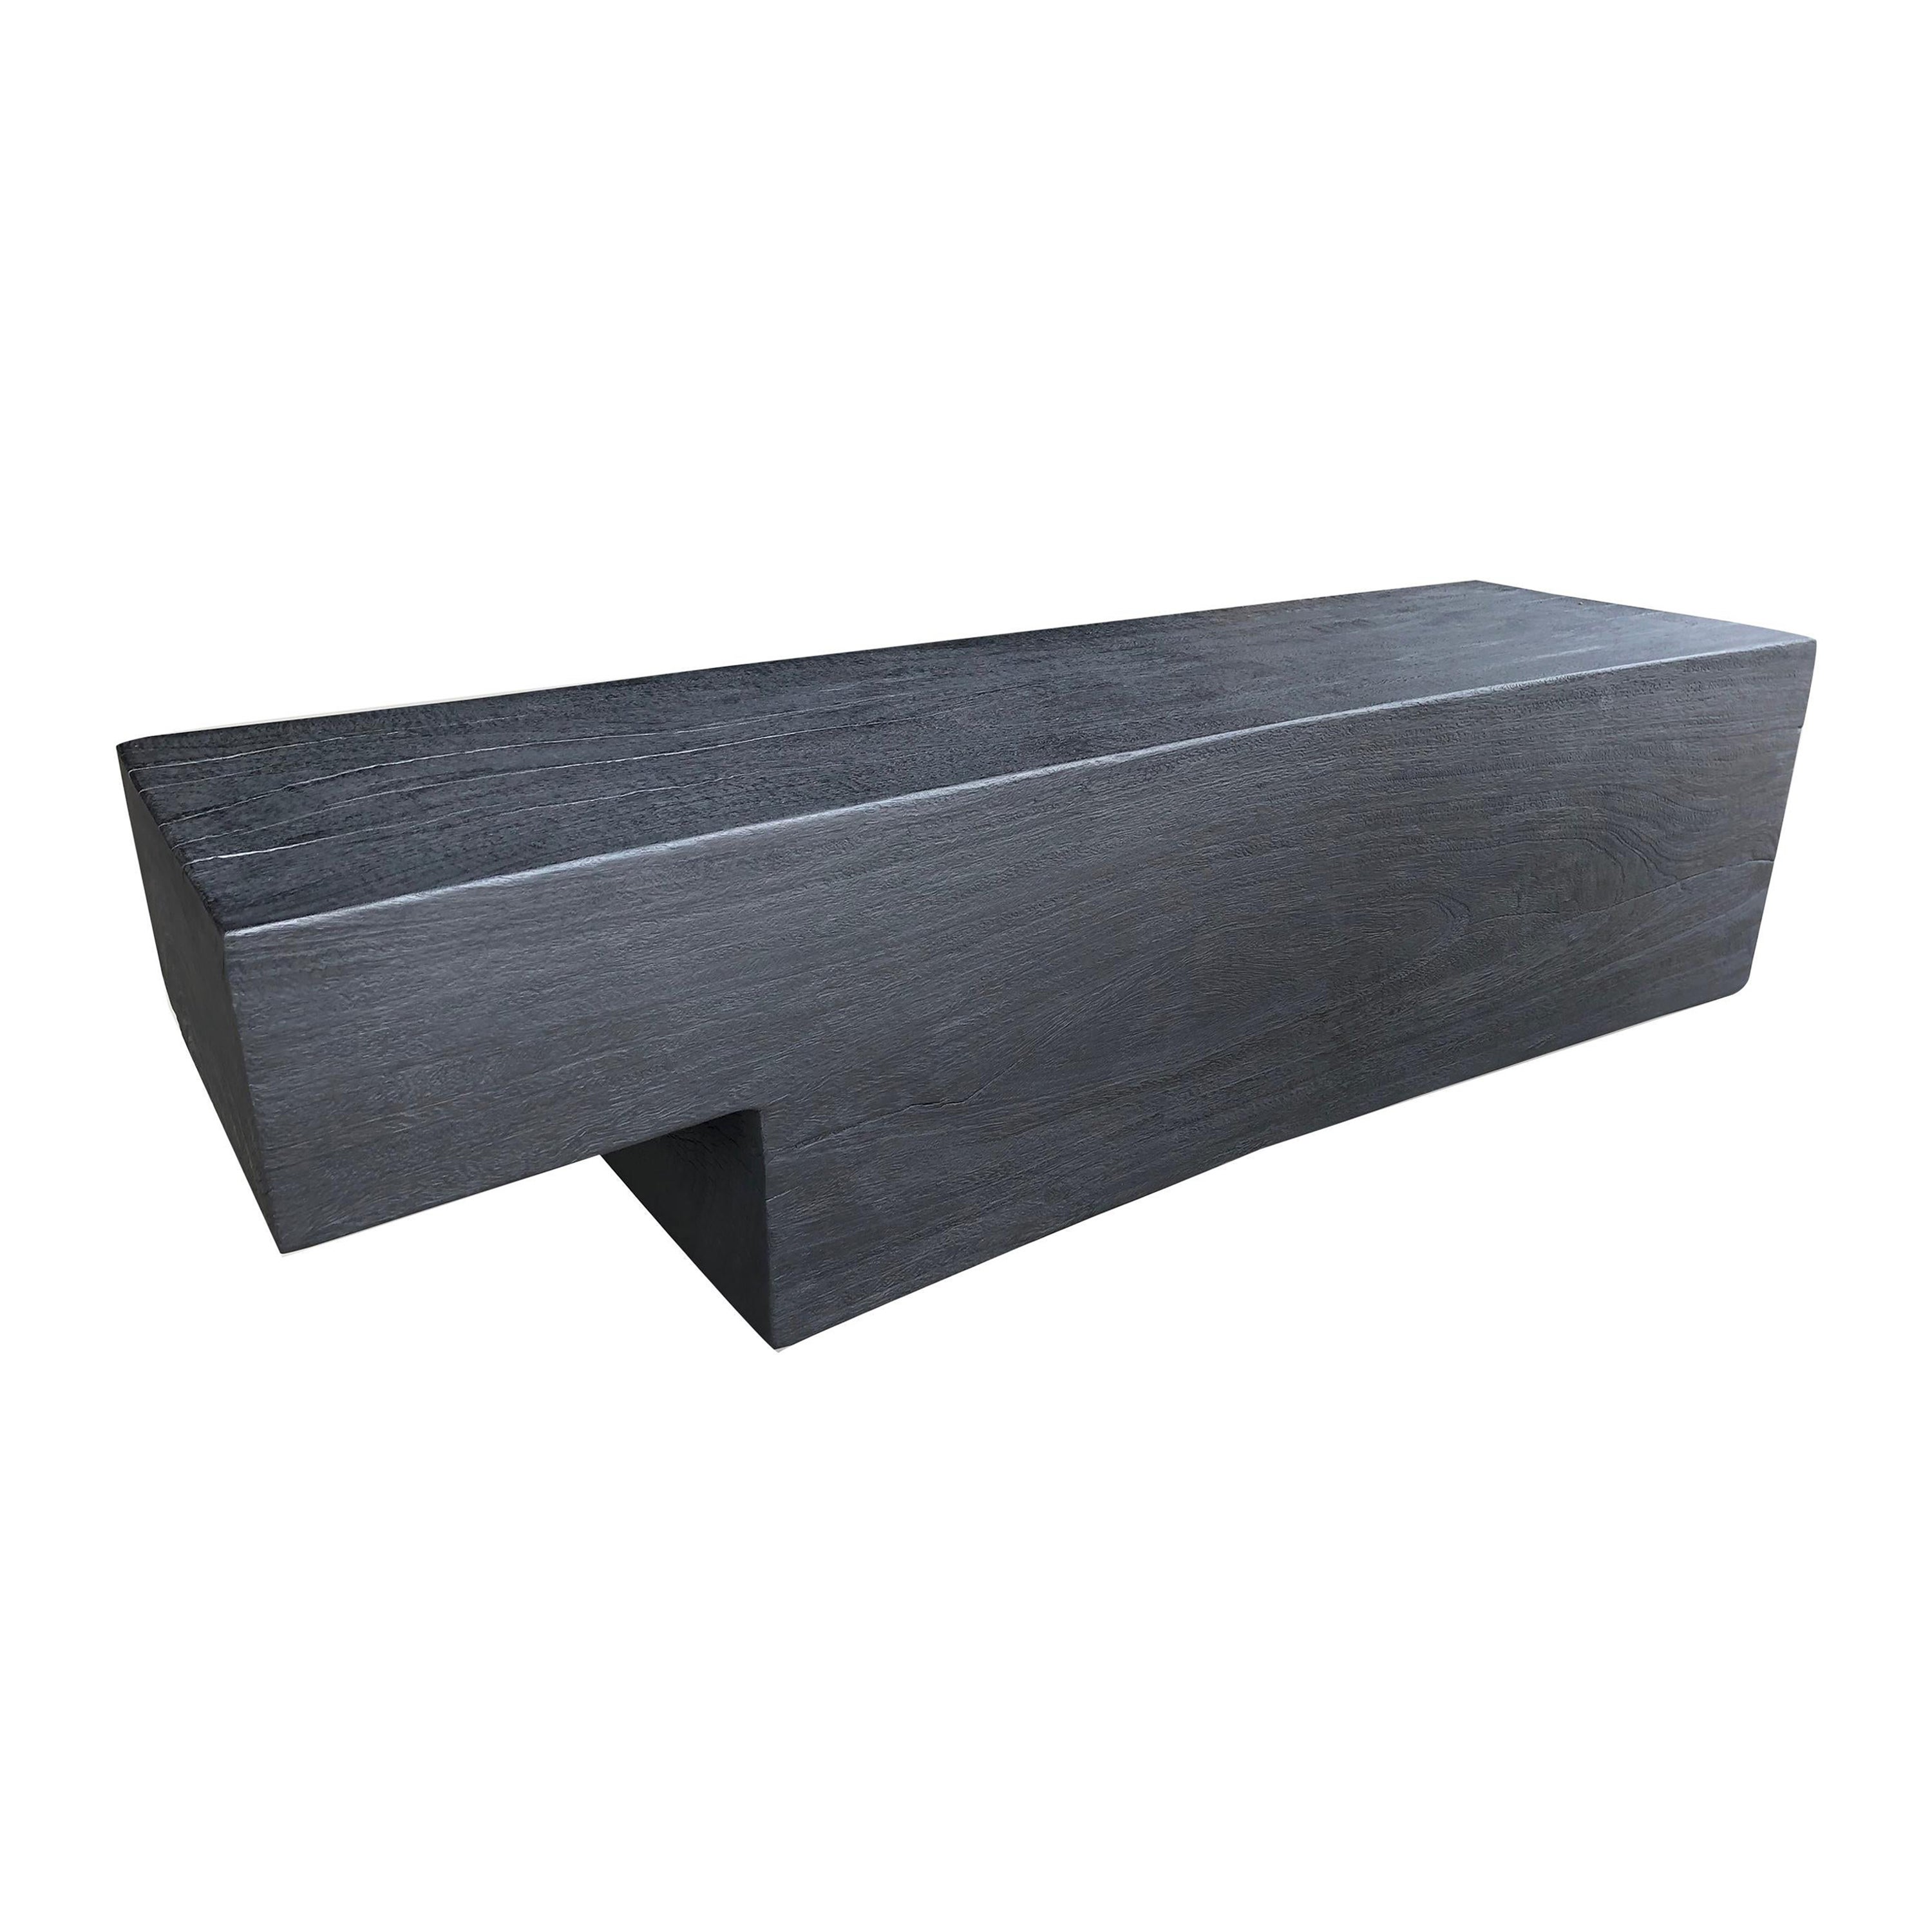 Andrianna Shamaris Minimalist Curved Bench For Sale